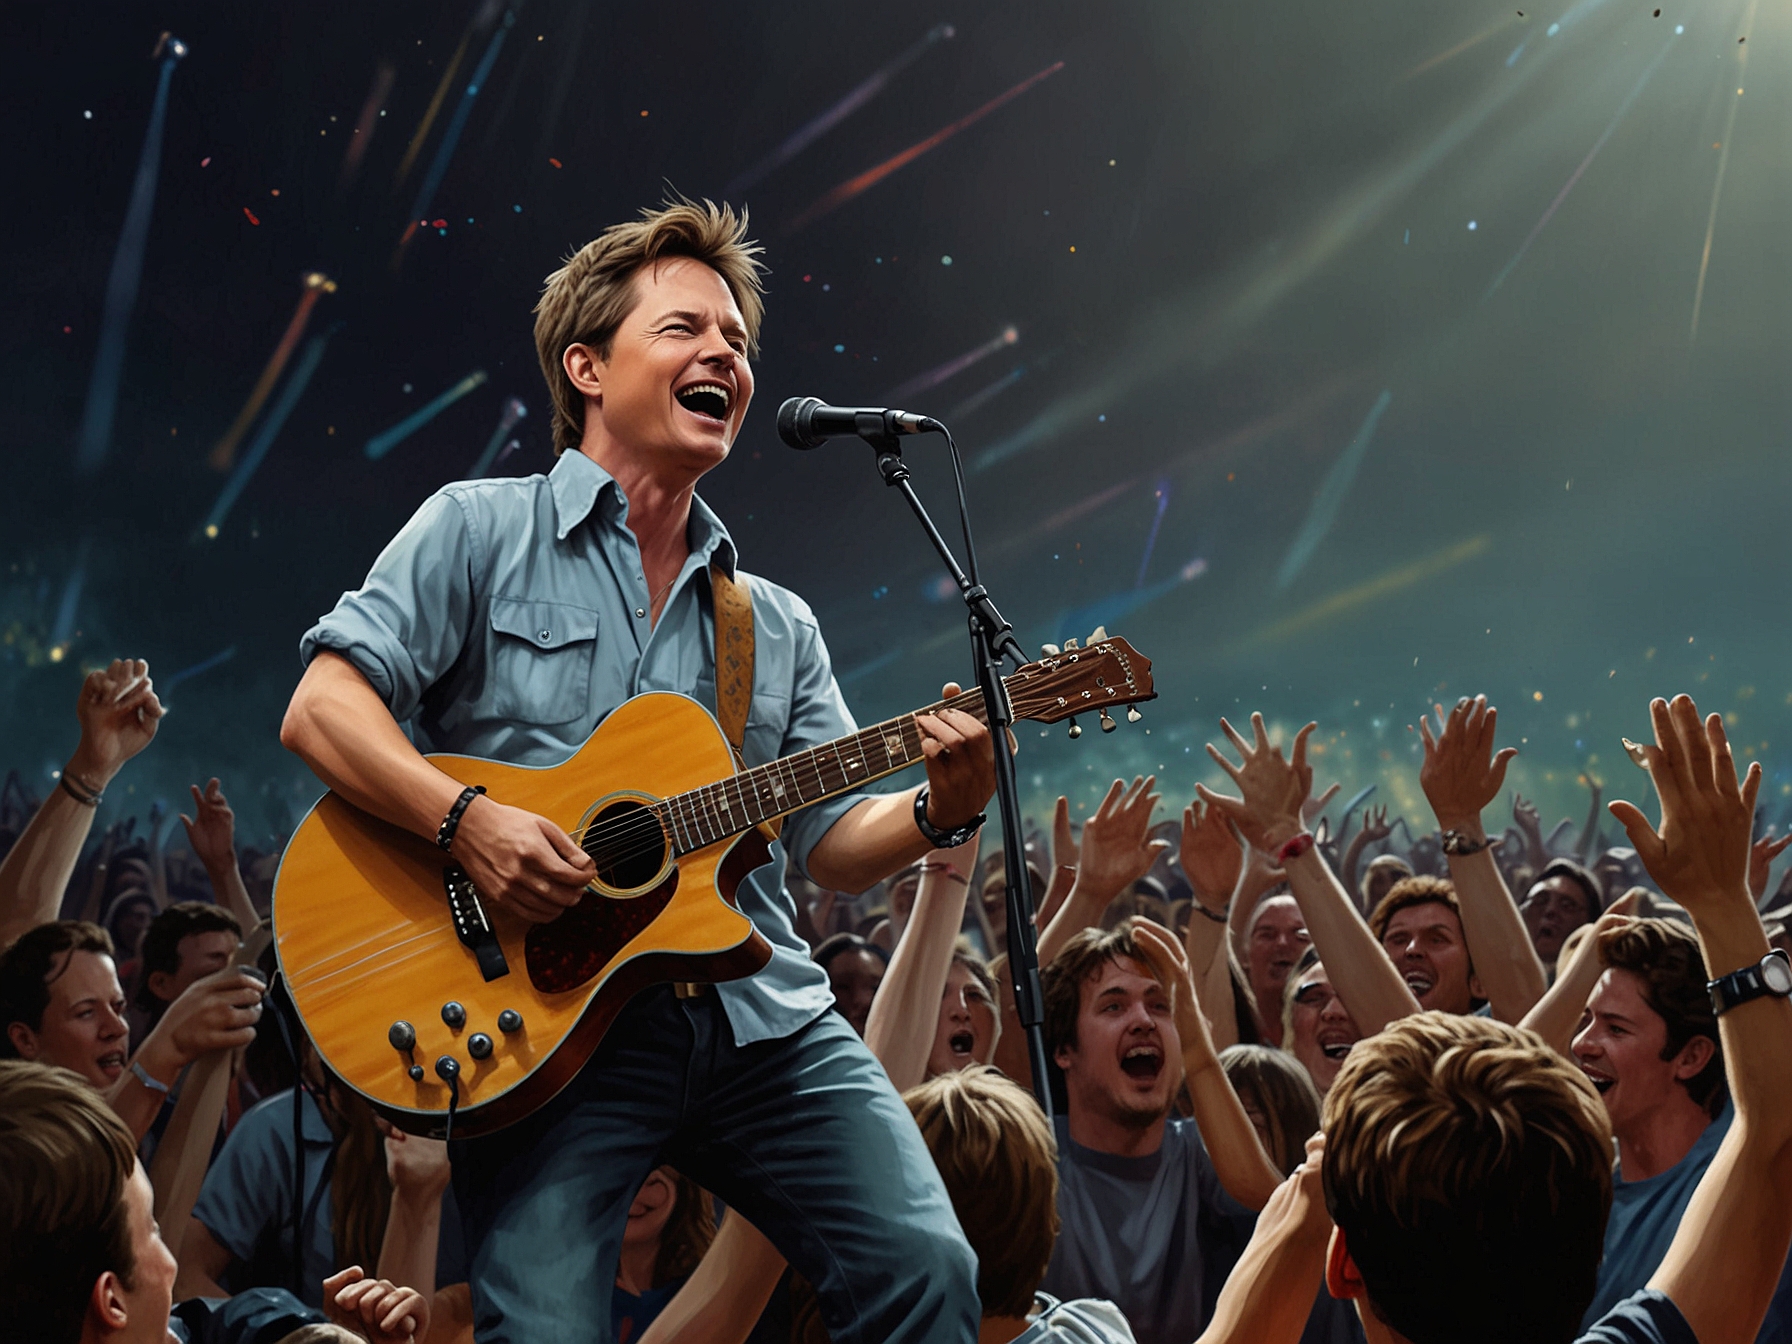 Michael J. Fox on stage at Glastonbury Festival, holding a guitar and performing with Coldplay. The crowd is visibly enthusiastic, capturing the excitement and nostalgia of the moment.